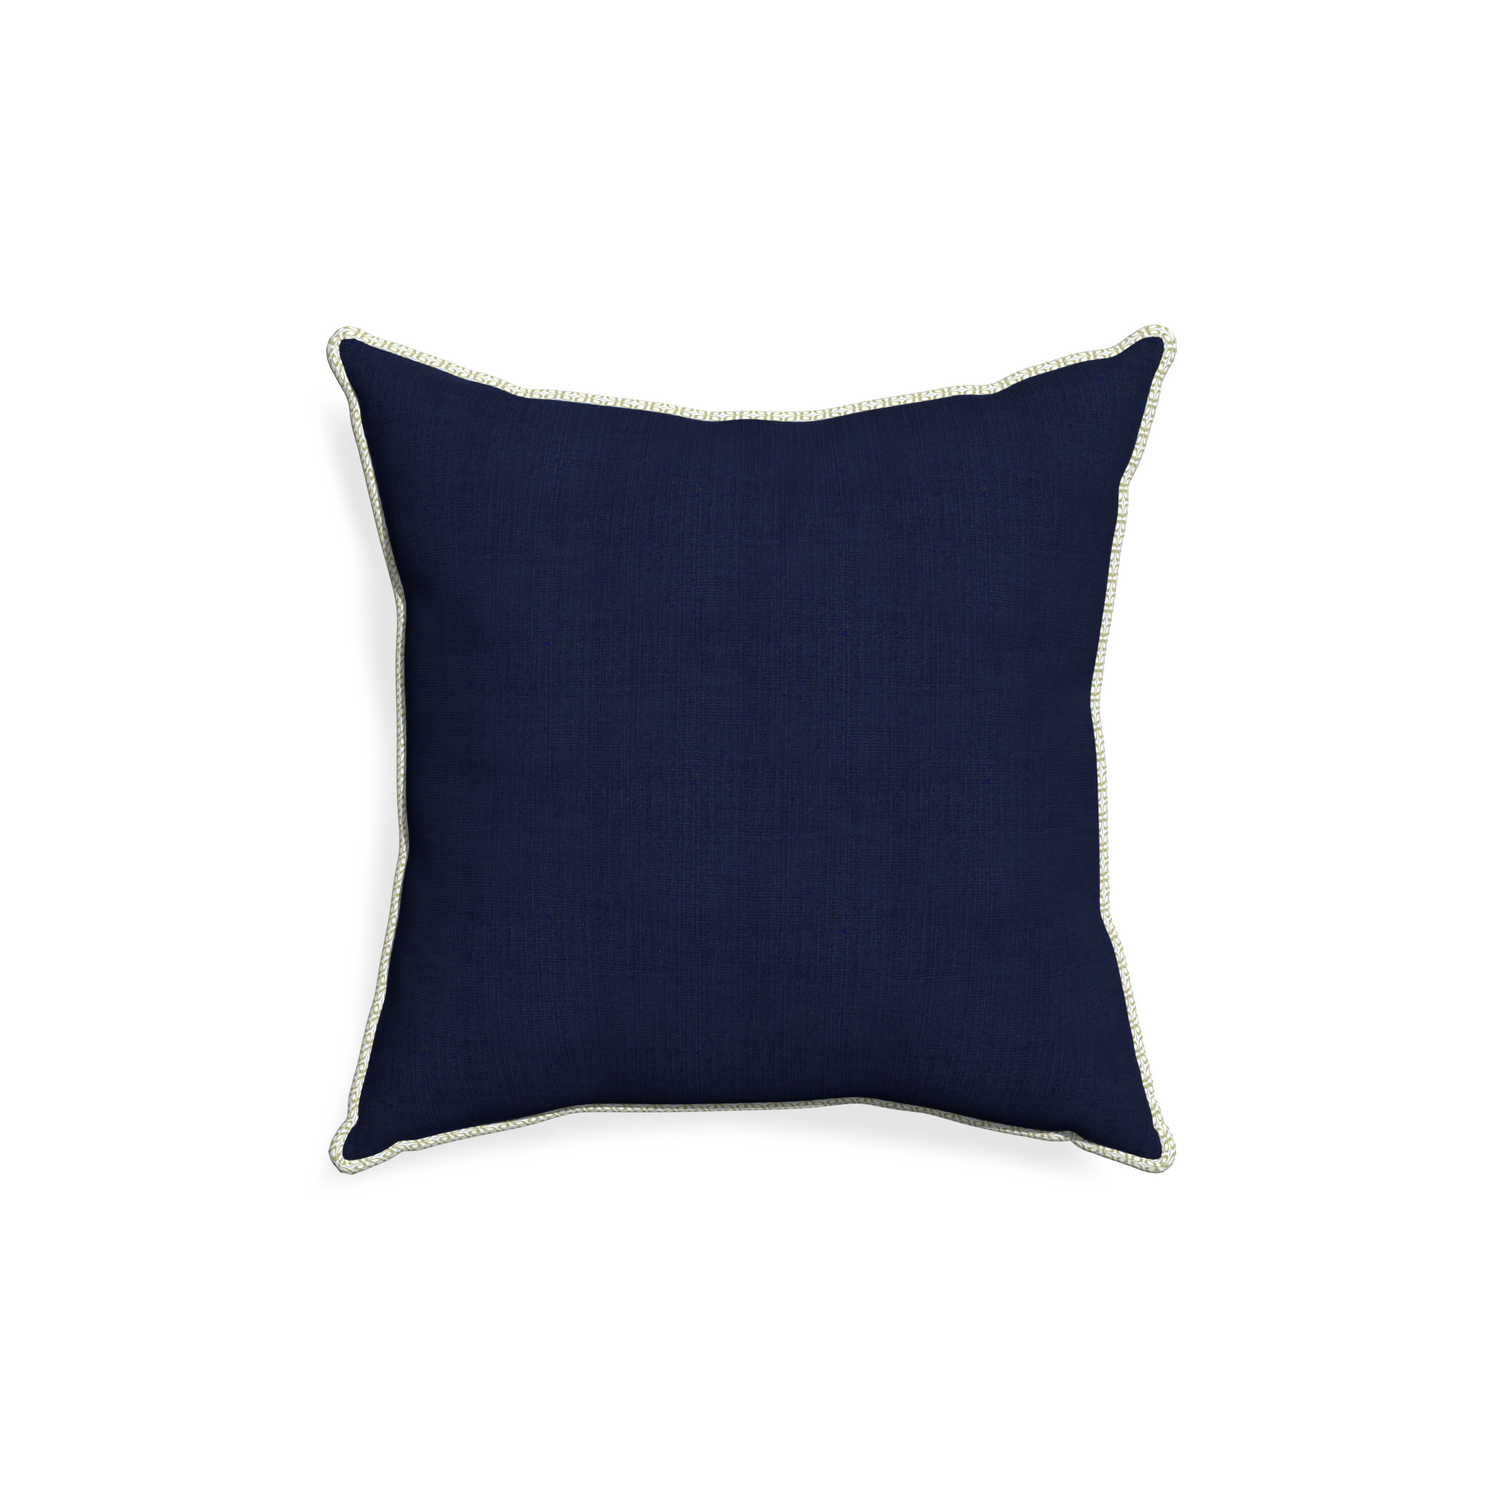 18-square midnight custom pillow with l piping on white background